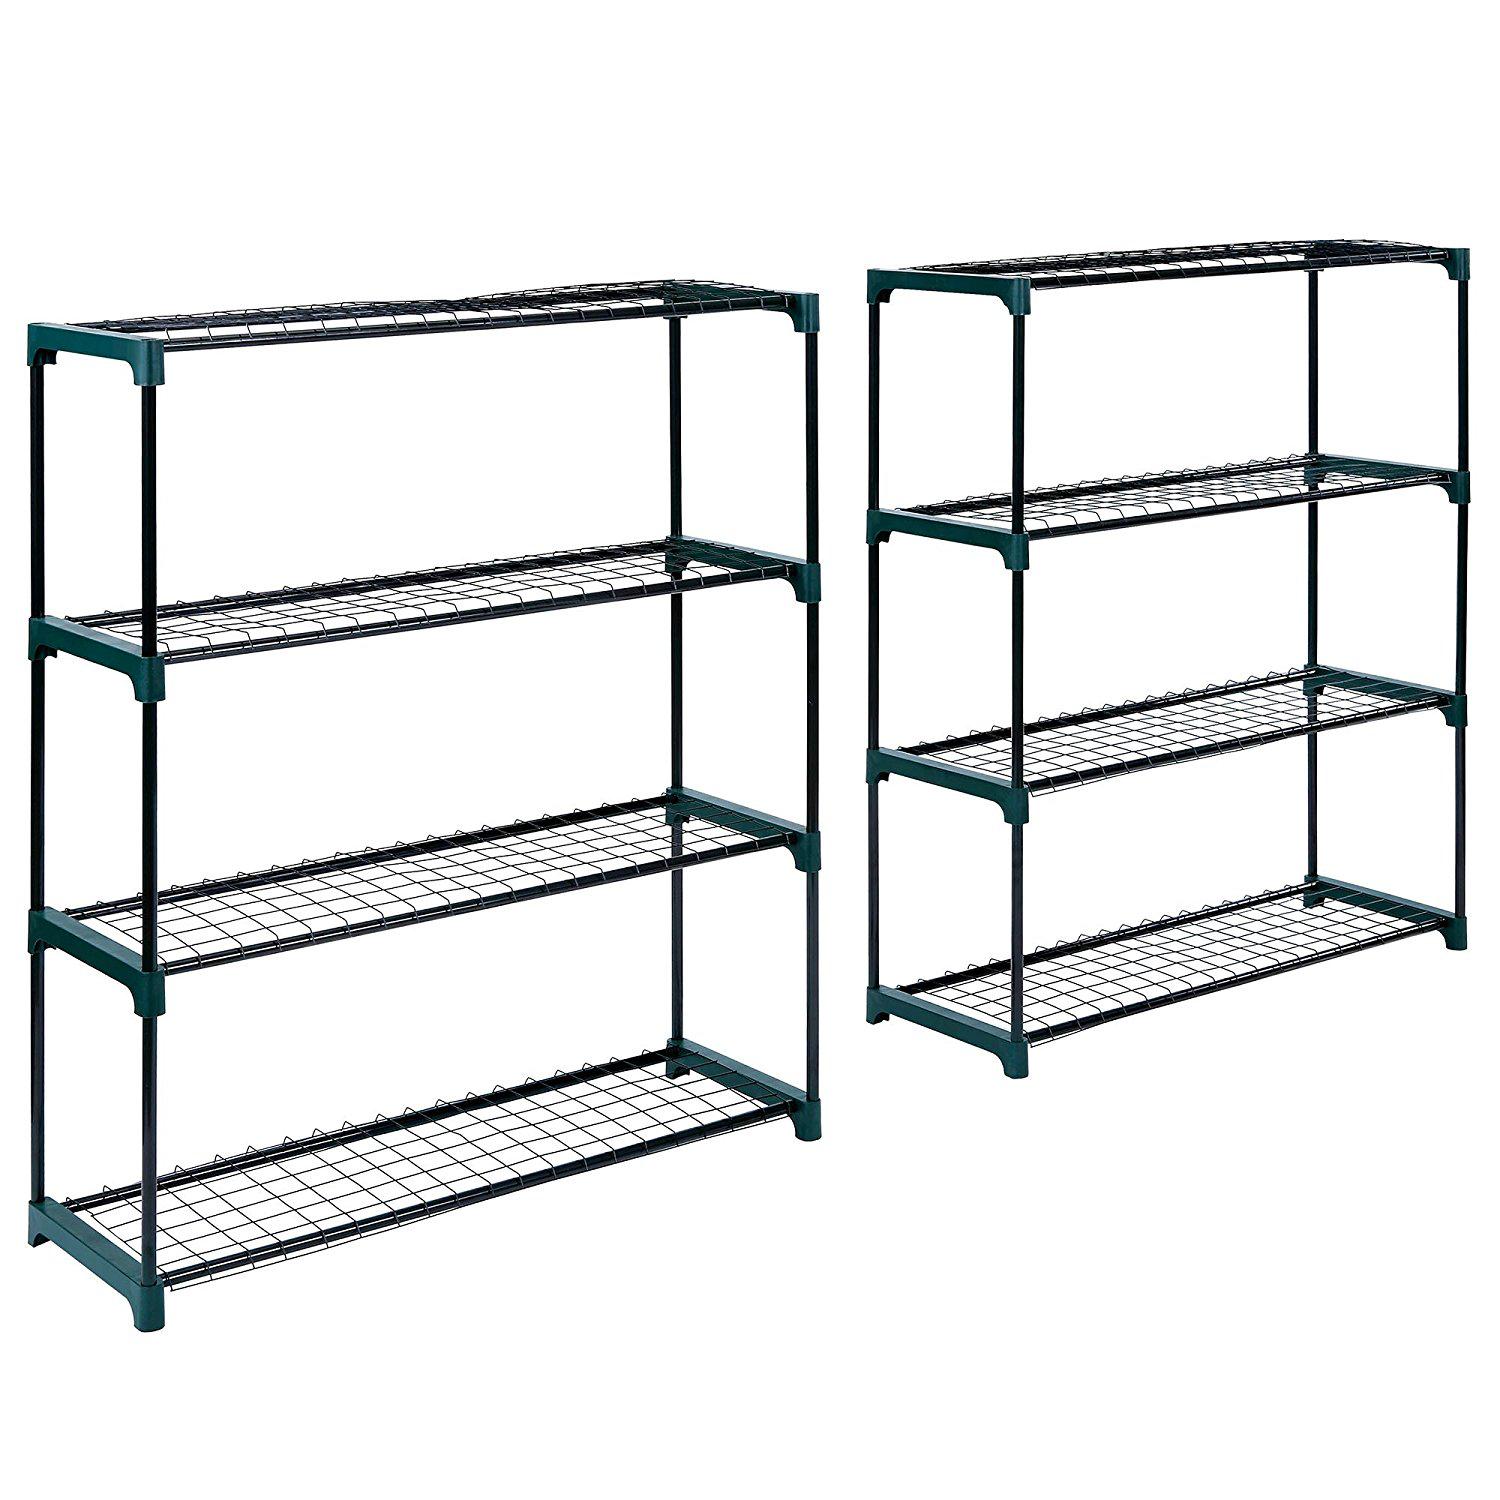 Flower Staging Display Greenhouse Racking Shelving - £14.99 : Oypla ...